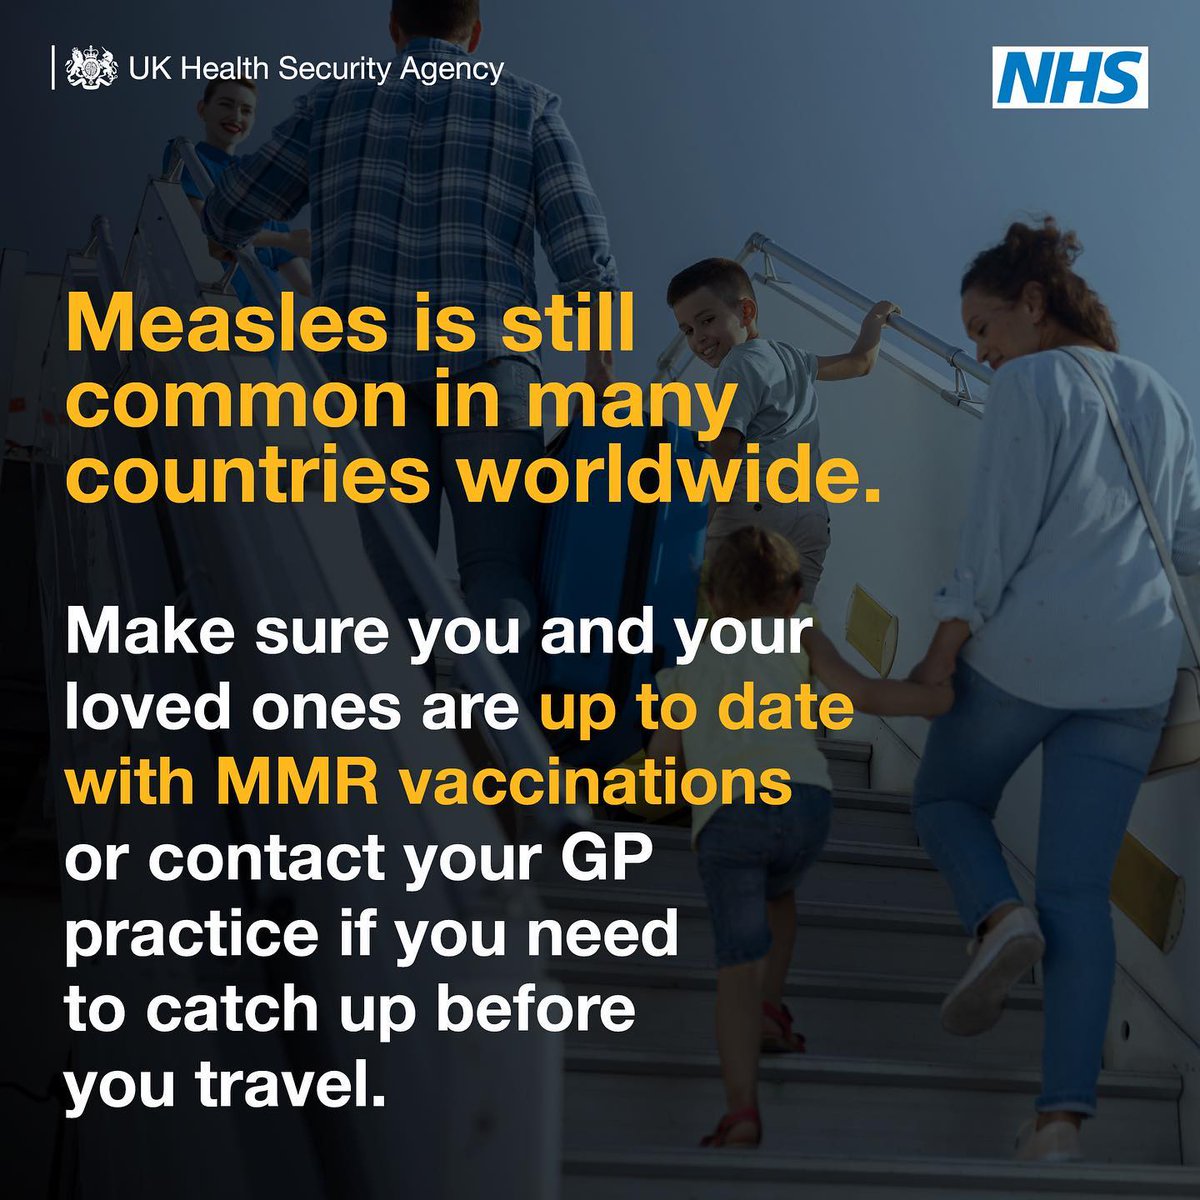 If you’re planning on travelling abroad this summer, make sure you and your loved ones are up to date with vaccinations like #MMR if you're travelling to countries where measles is common. ☀😎⛱ Read more about staying well when travelling: ukhsa.blog.gov.uk/2023/05/22/sta…